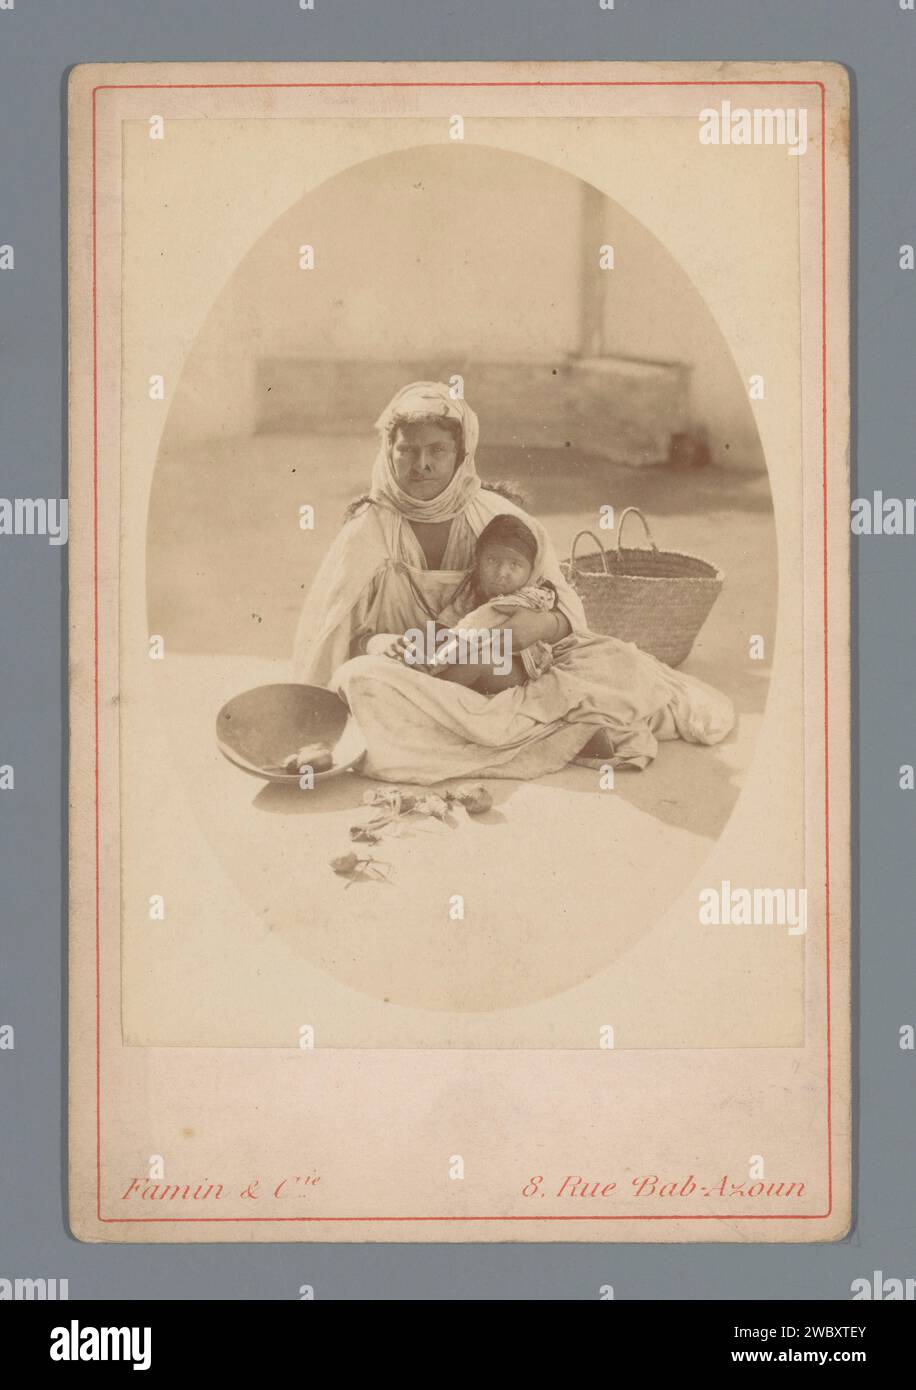 Portrait of an unknown mother and child, Famin et Cie., 1863 - 1889 cabinet photograph  Algeria cardboard. photographic support albumen print anonymous historical person portrayed. mother and baby or young child Algeria Stock Photo